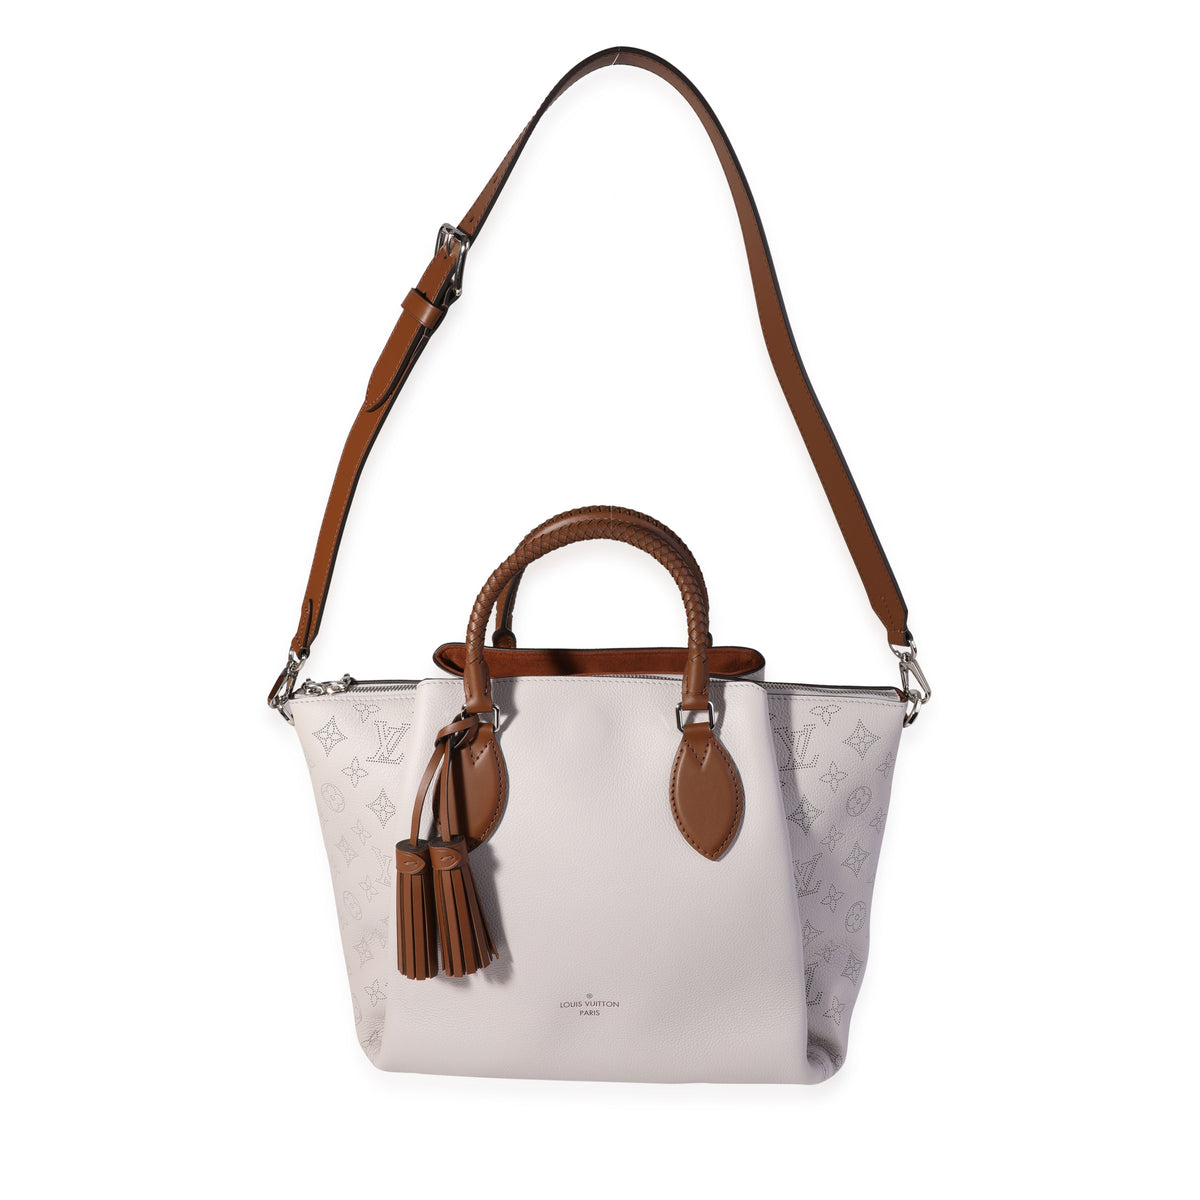 LOUIS VUITTON HAUMEA Tote Bag in Galet Color Smooth and Perforated Calf  Leather